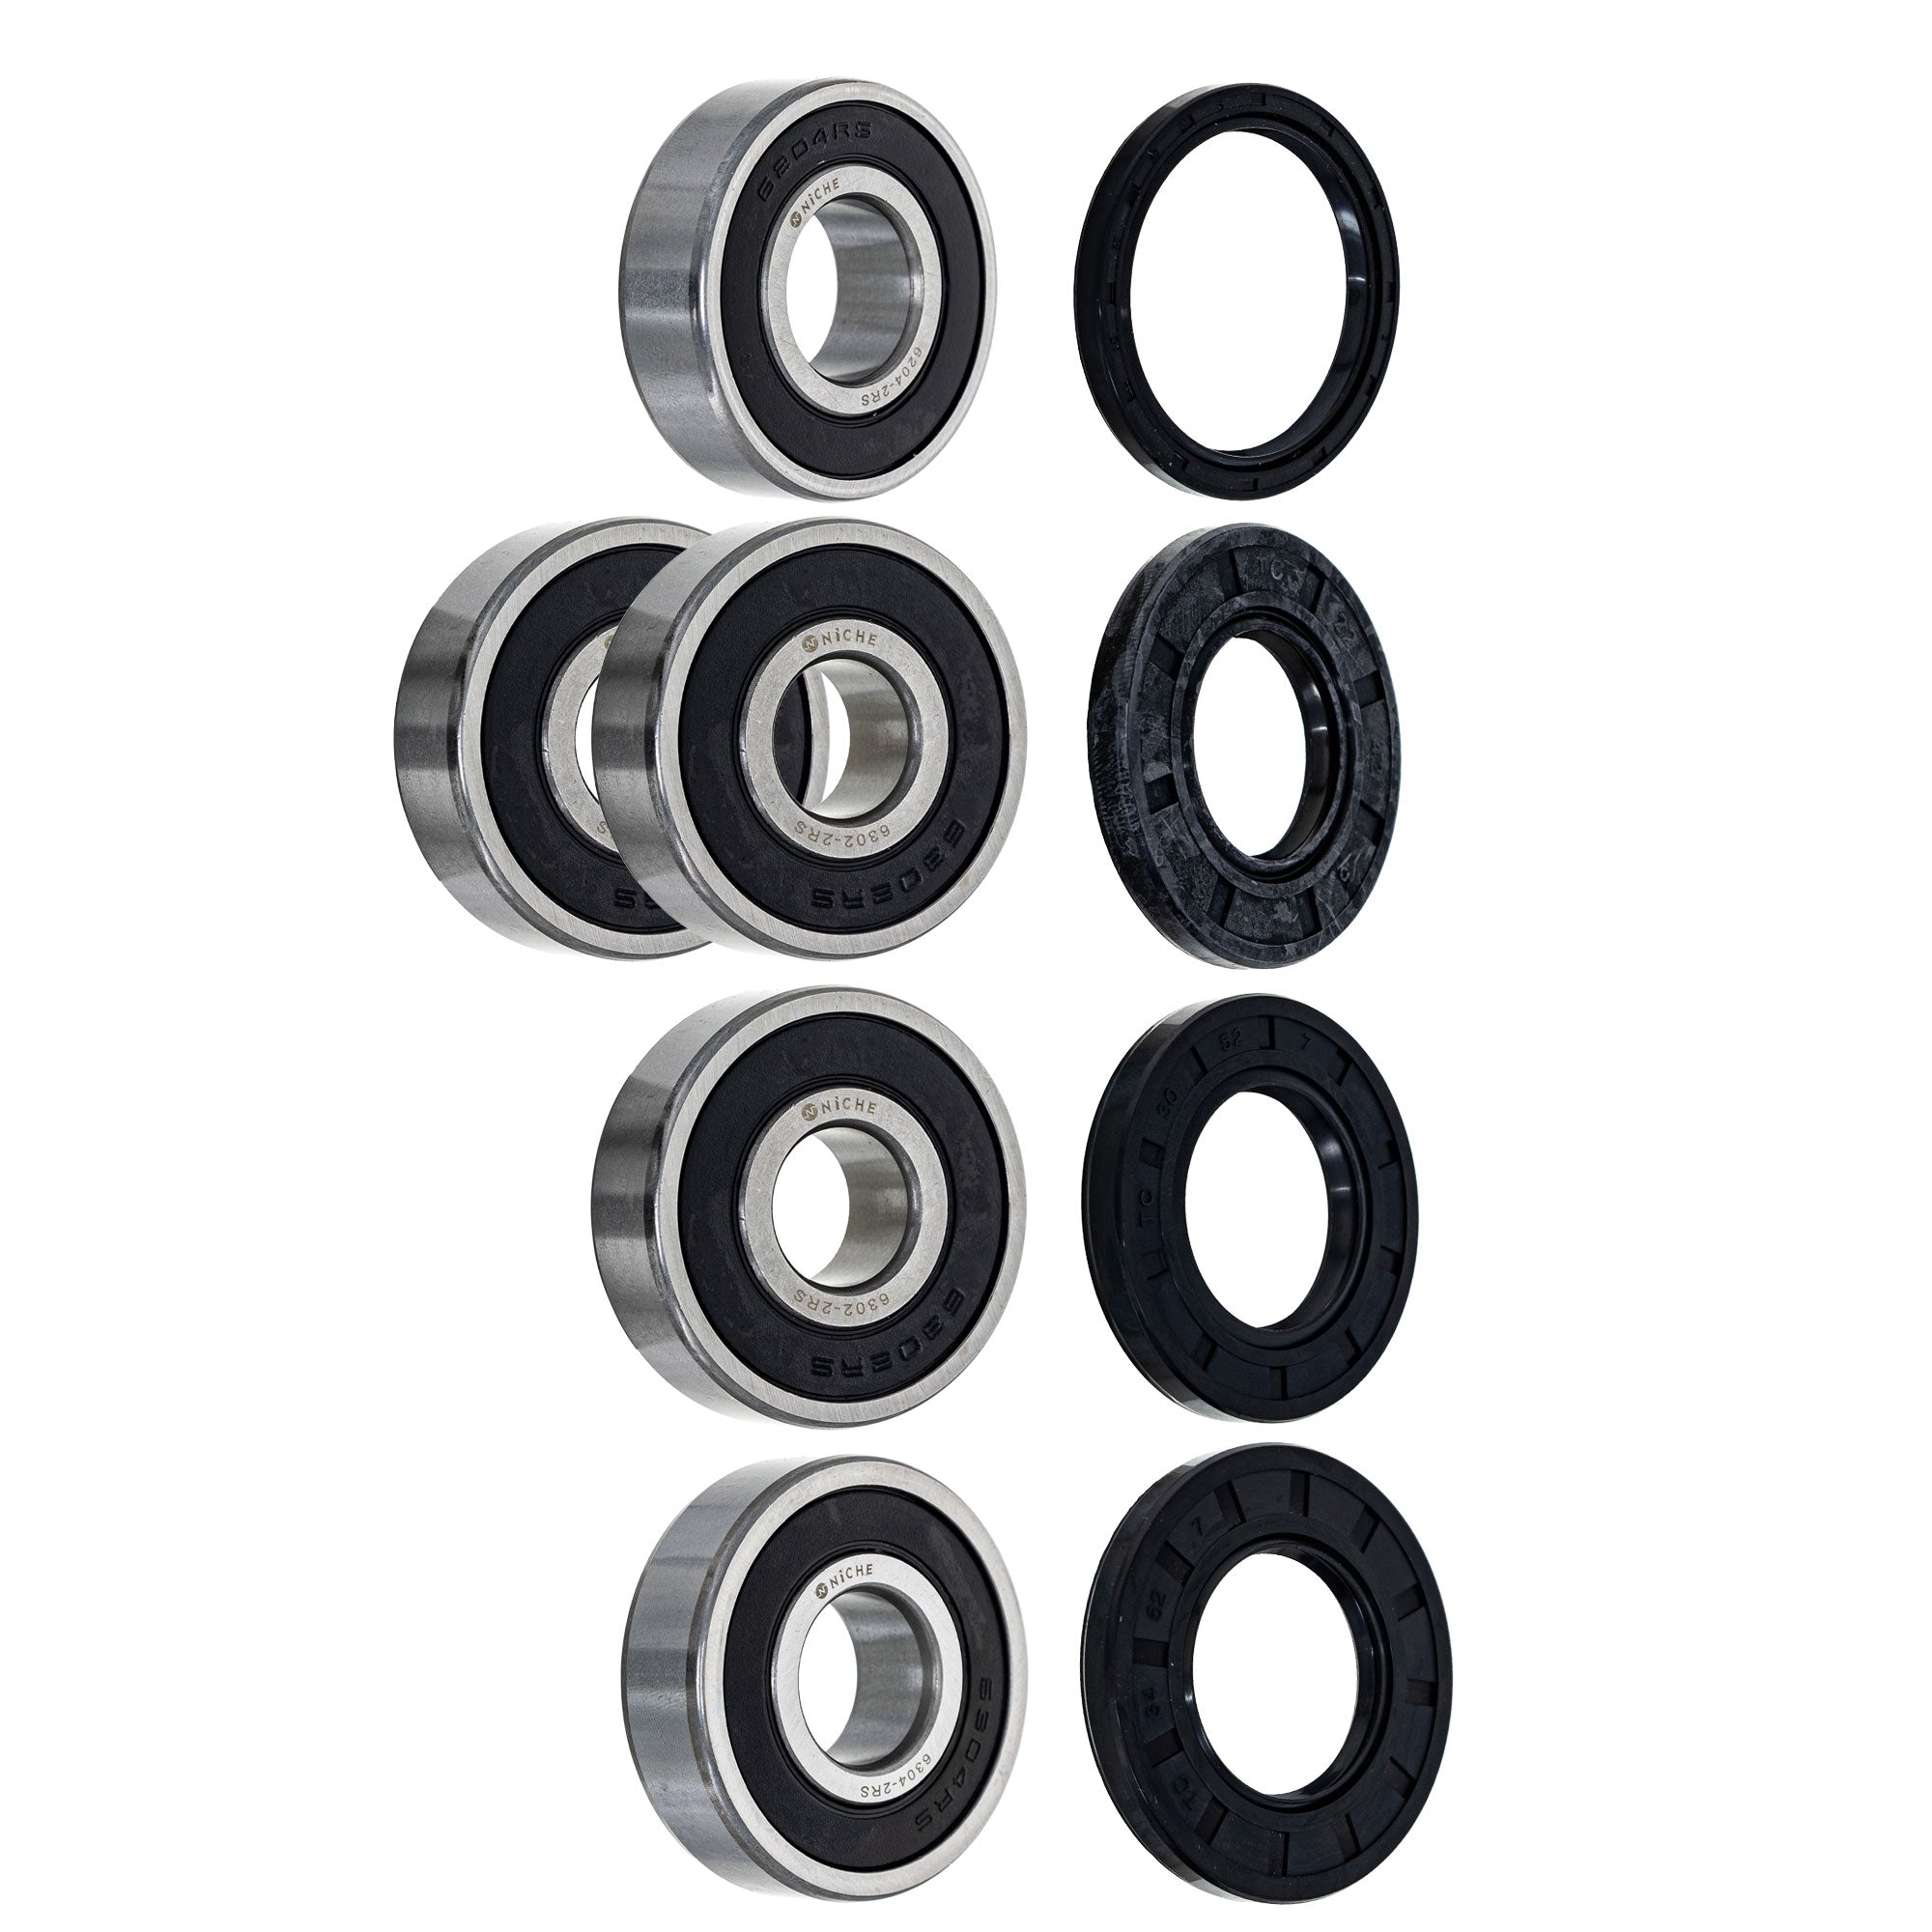 Wheel Bearing Seal Kit for zOTHER Ref No NICHE MK1009270